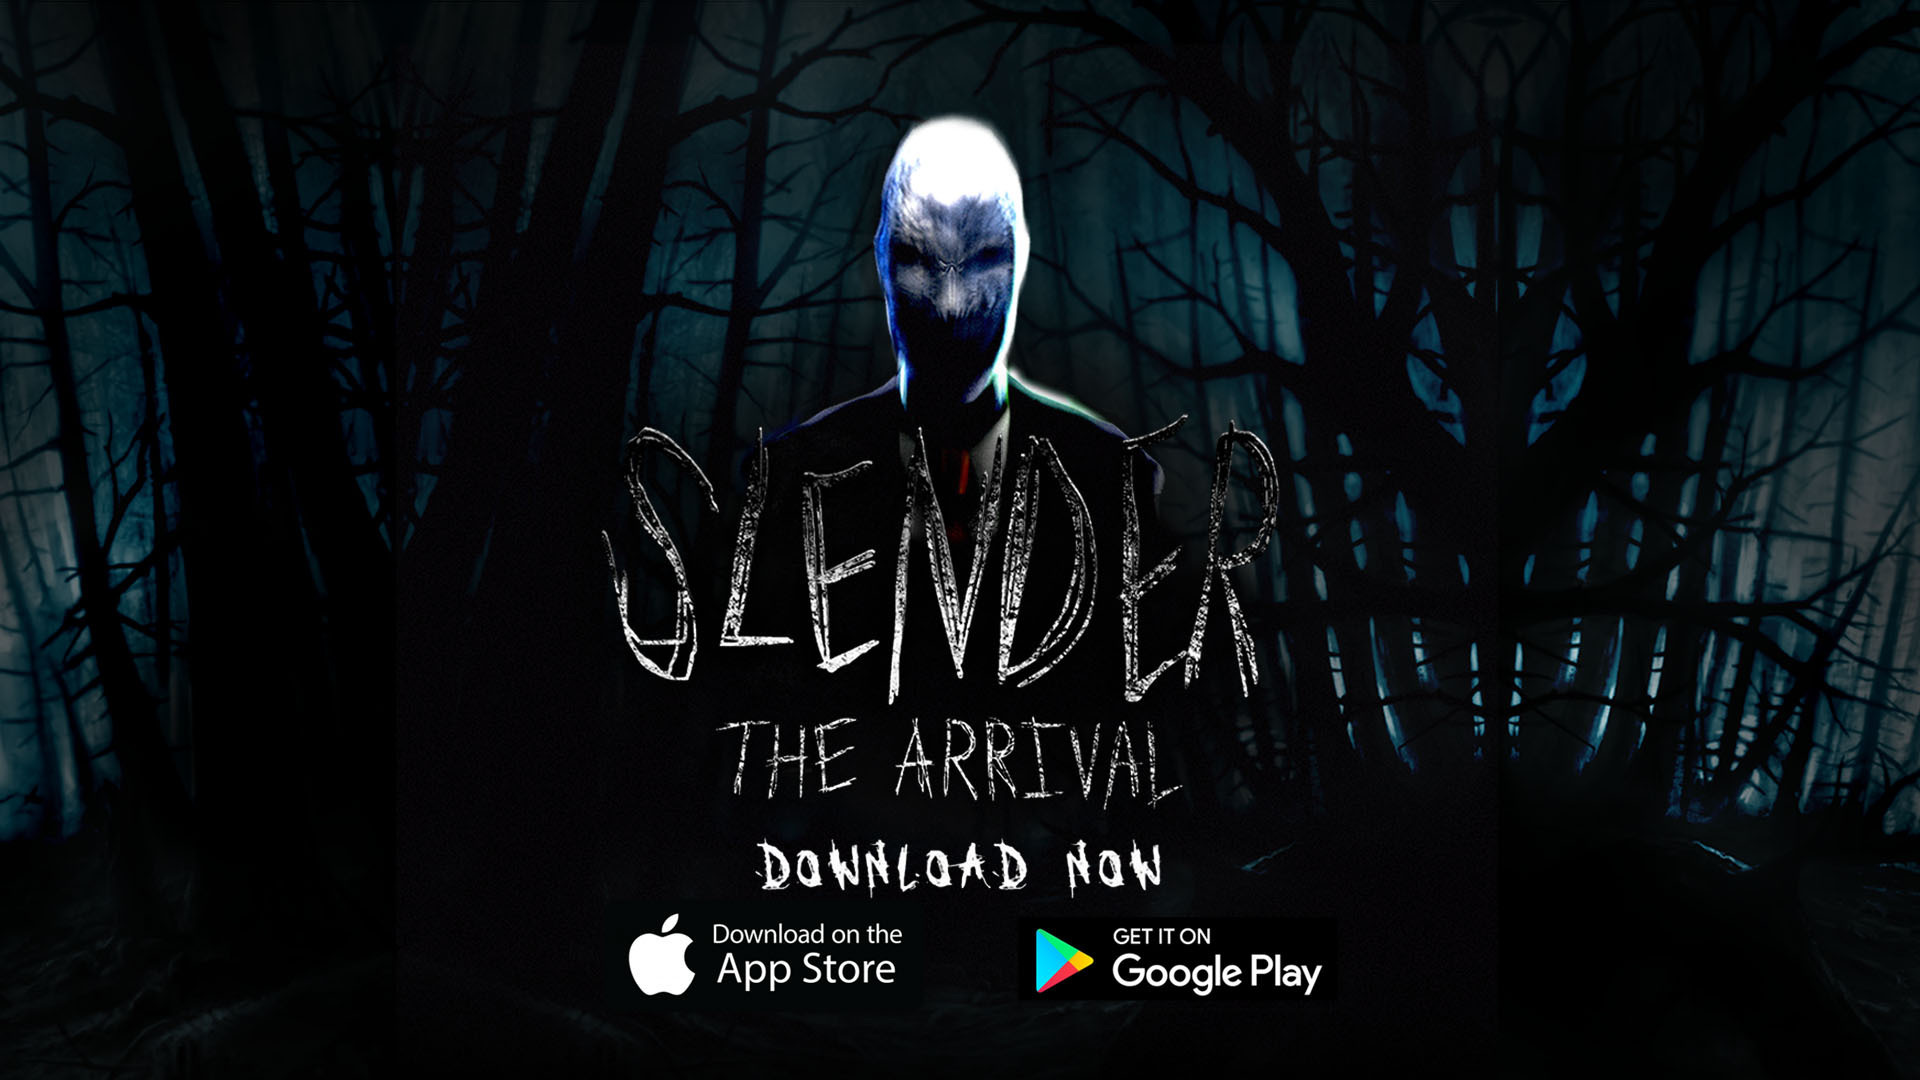 Slender: The Arrival there is no where you can hide. Slender: The Arrival has made its way to mobile; now you can play on the go! Download today on